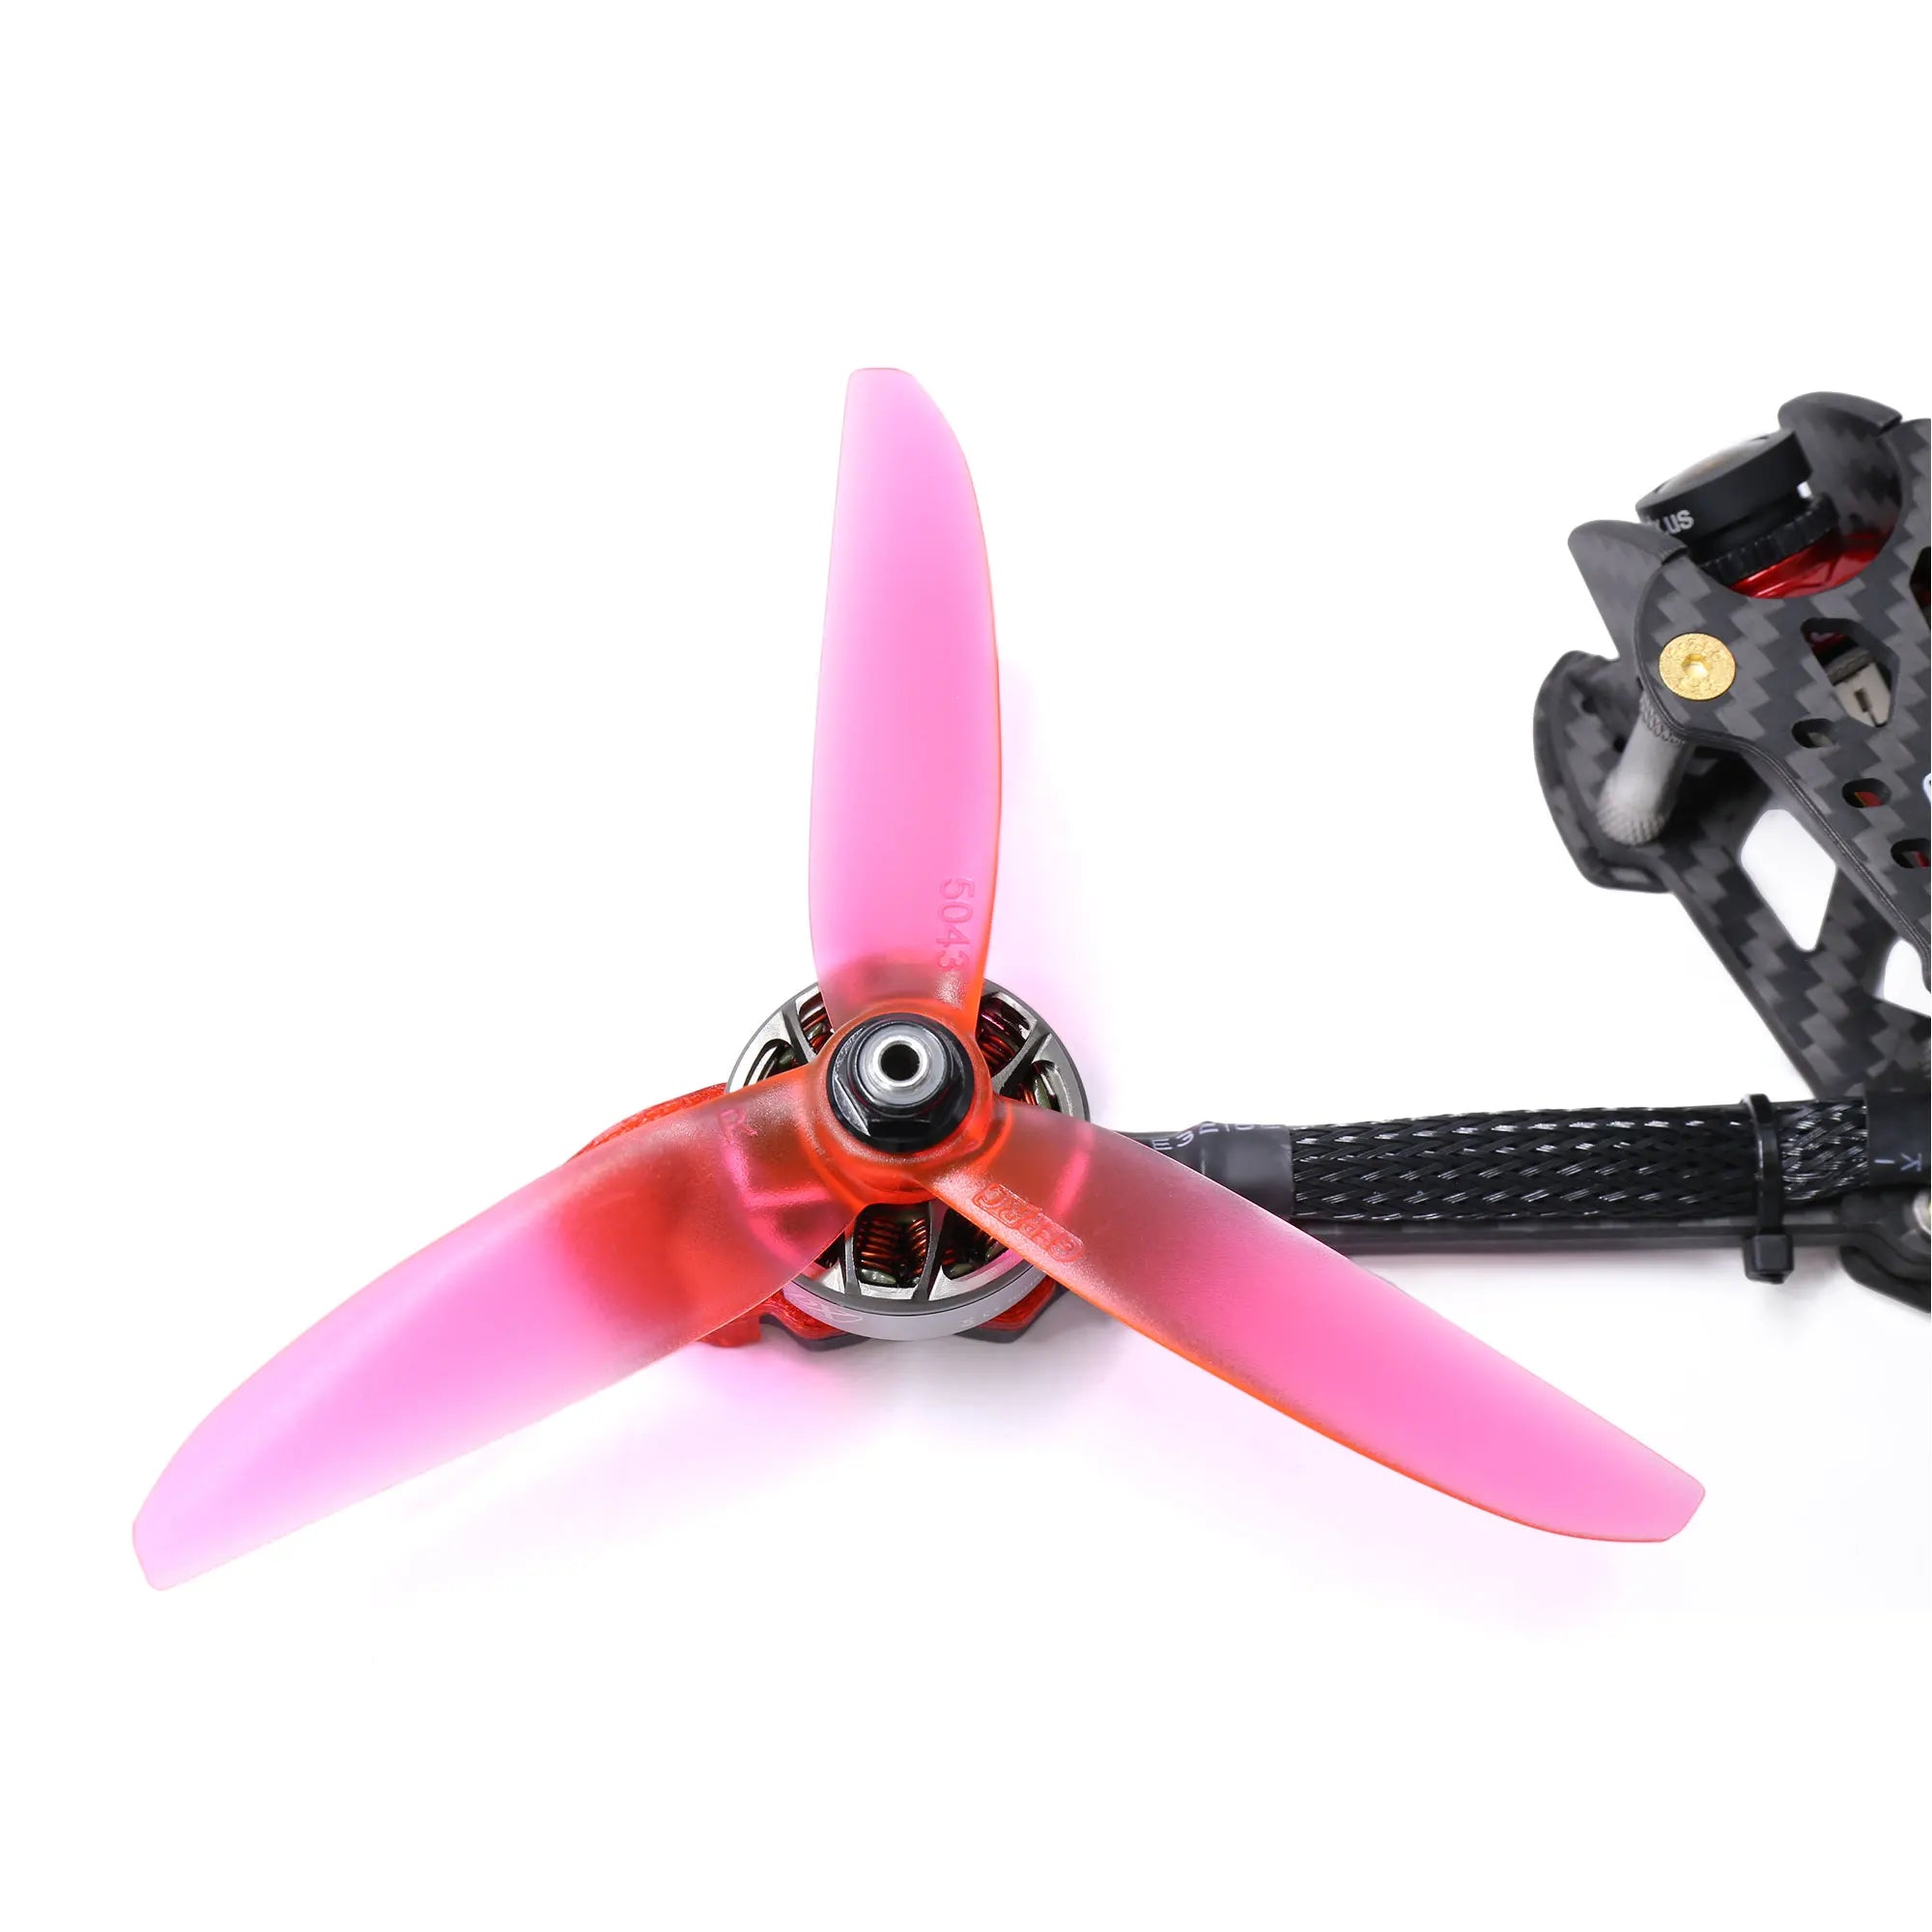 GEPRC MARK4 FPV Drone, we also provided some custom 3D printing accessories spare parts for players to replace.